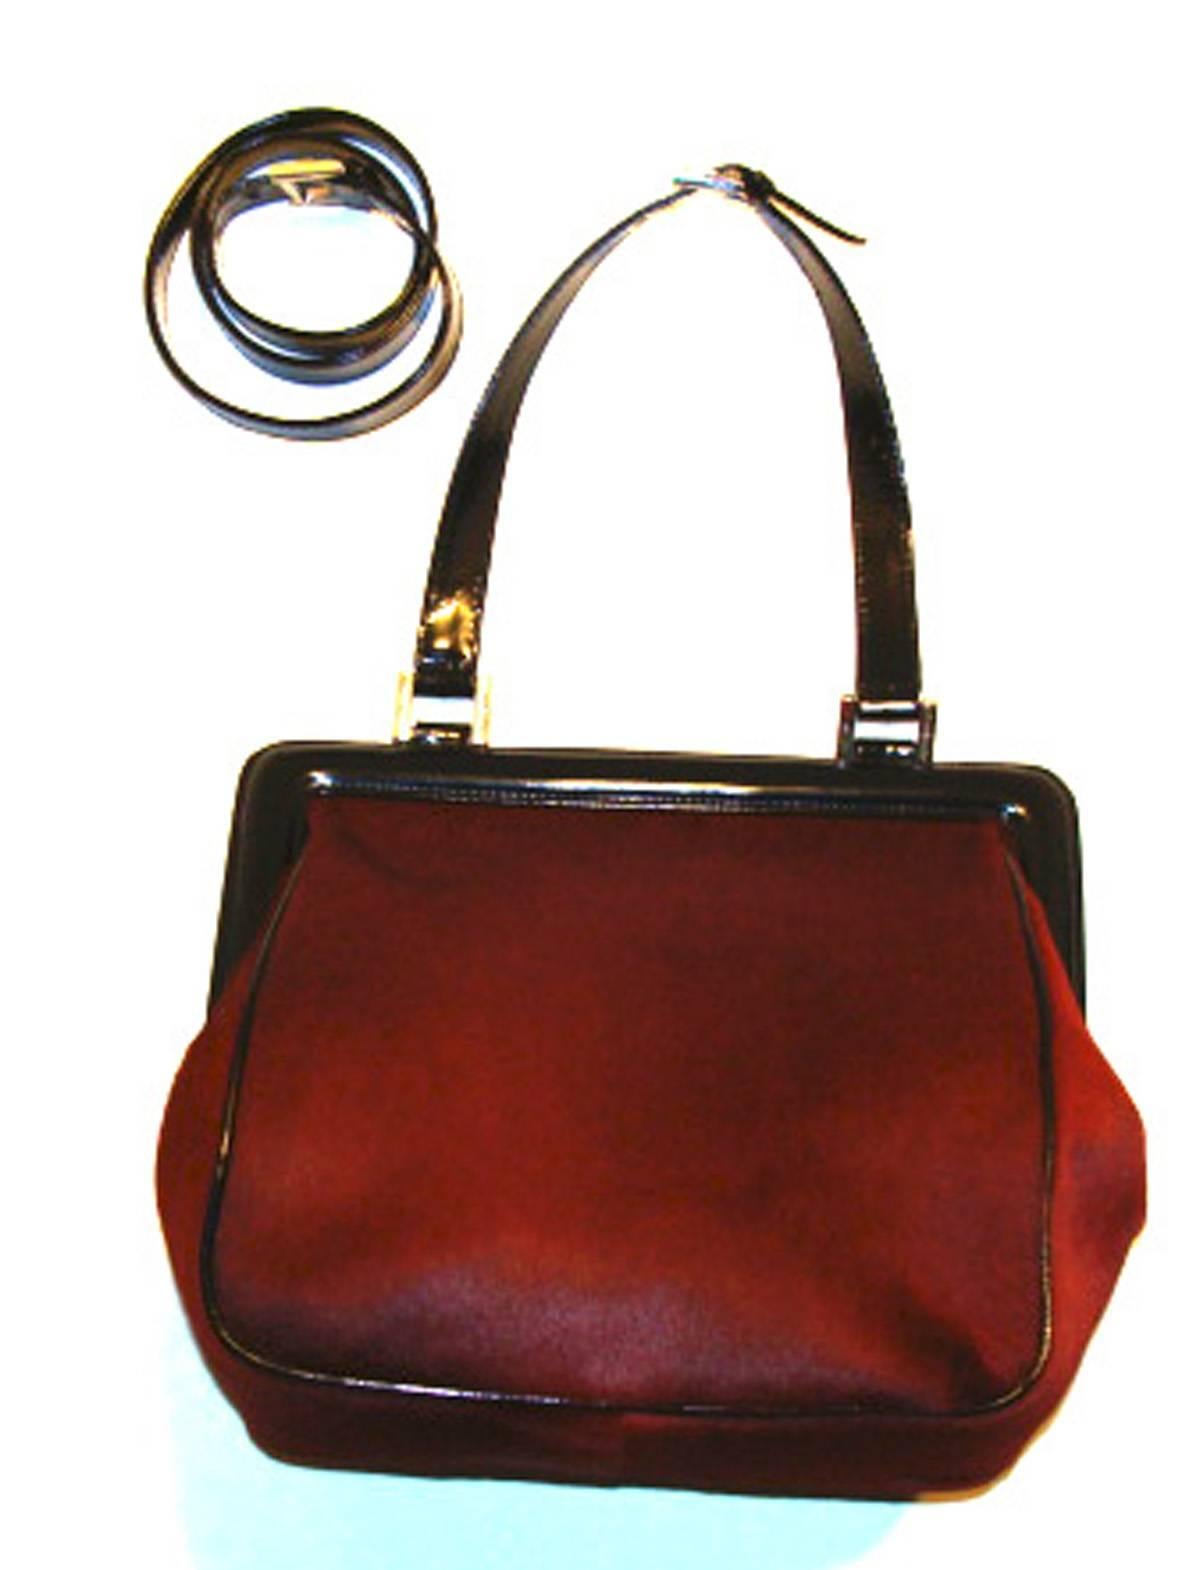 Vintage calf hair (pony) skin with black leather trim and lambskin interior.  This bag also comes with an additional strap that extends the top handle style to a shoulder bag style.  The hardware is signed Roberta di Camerino and is in a silver